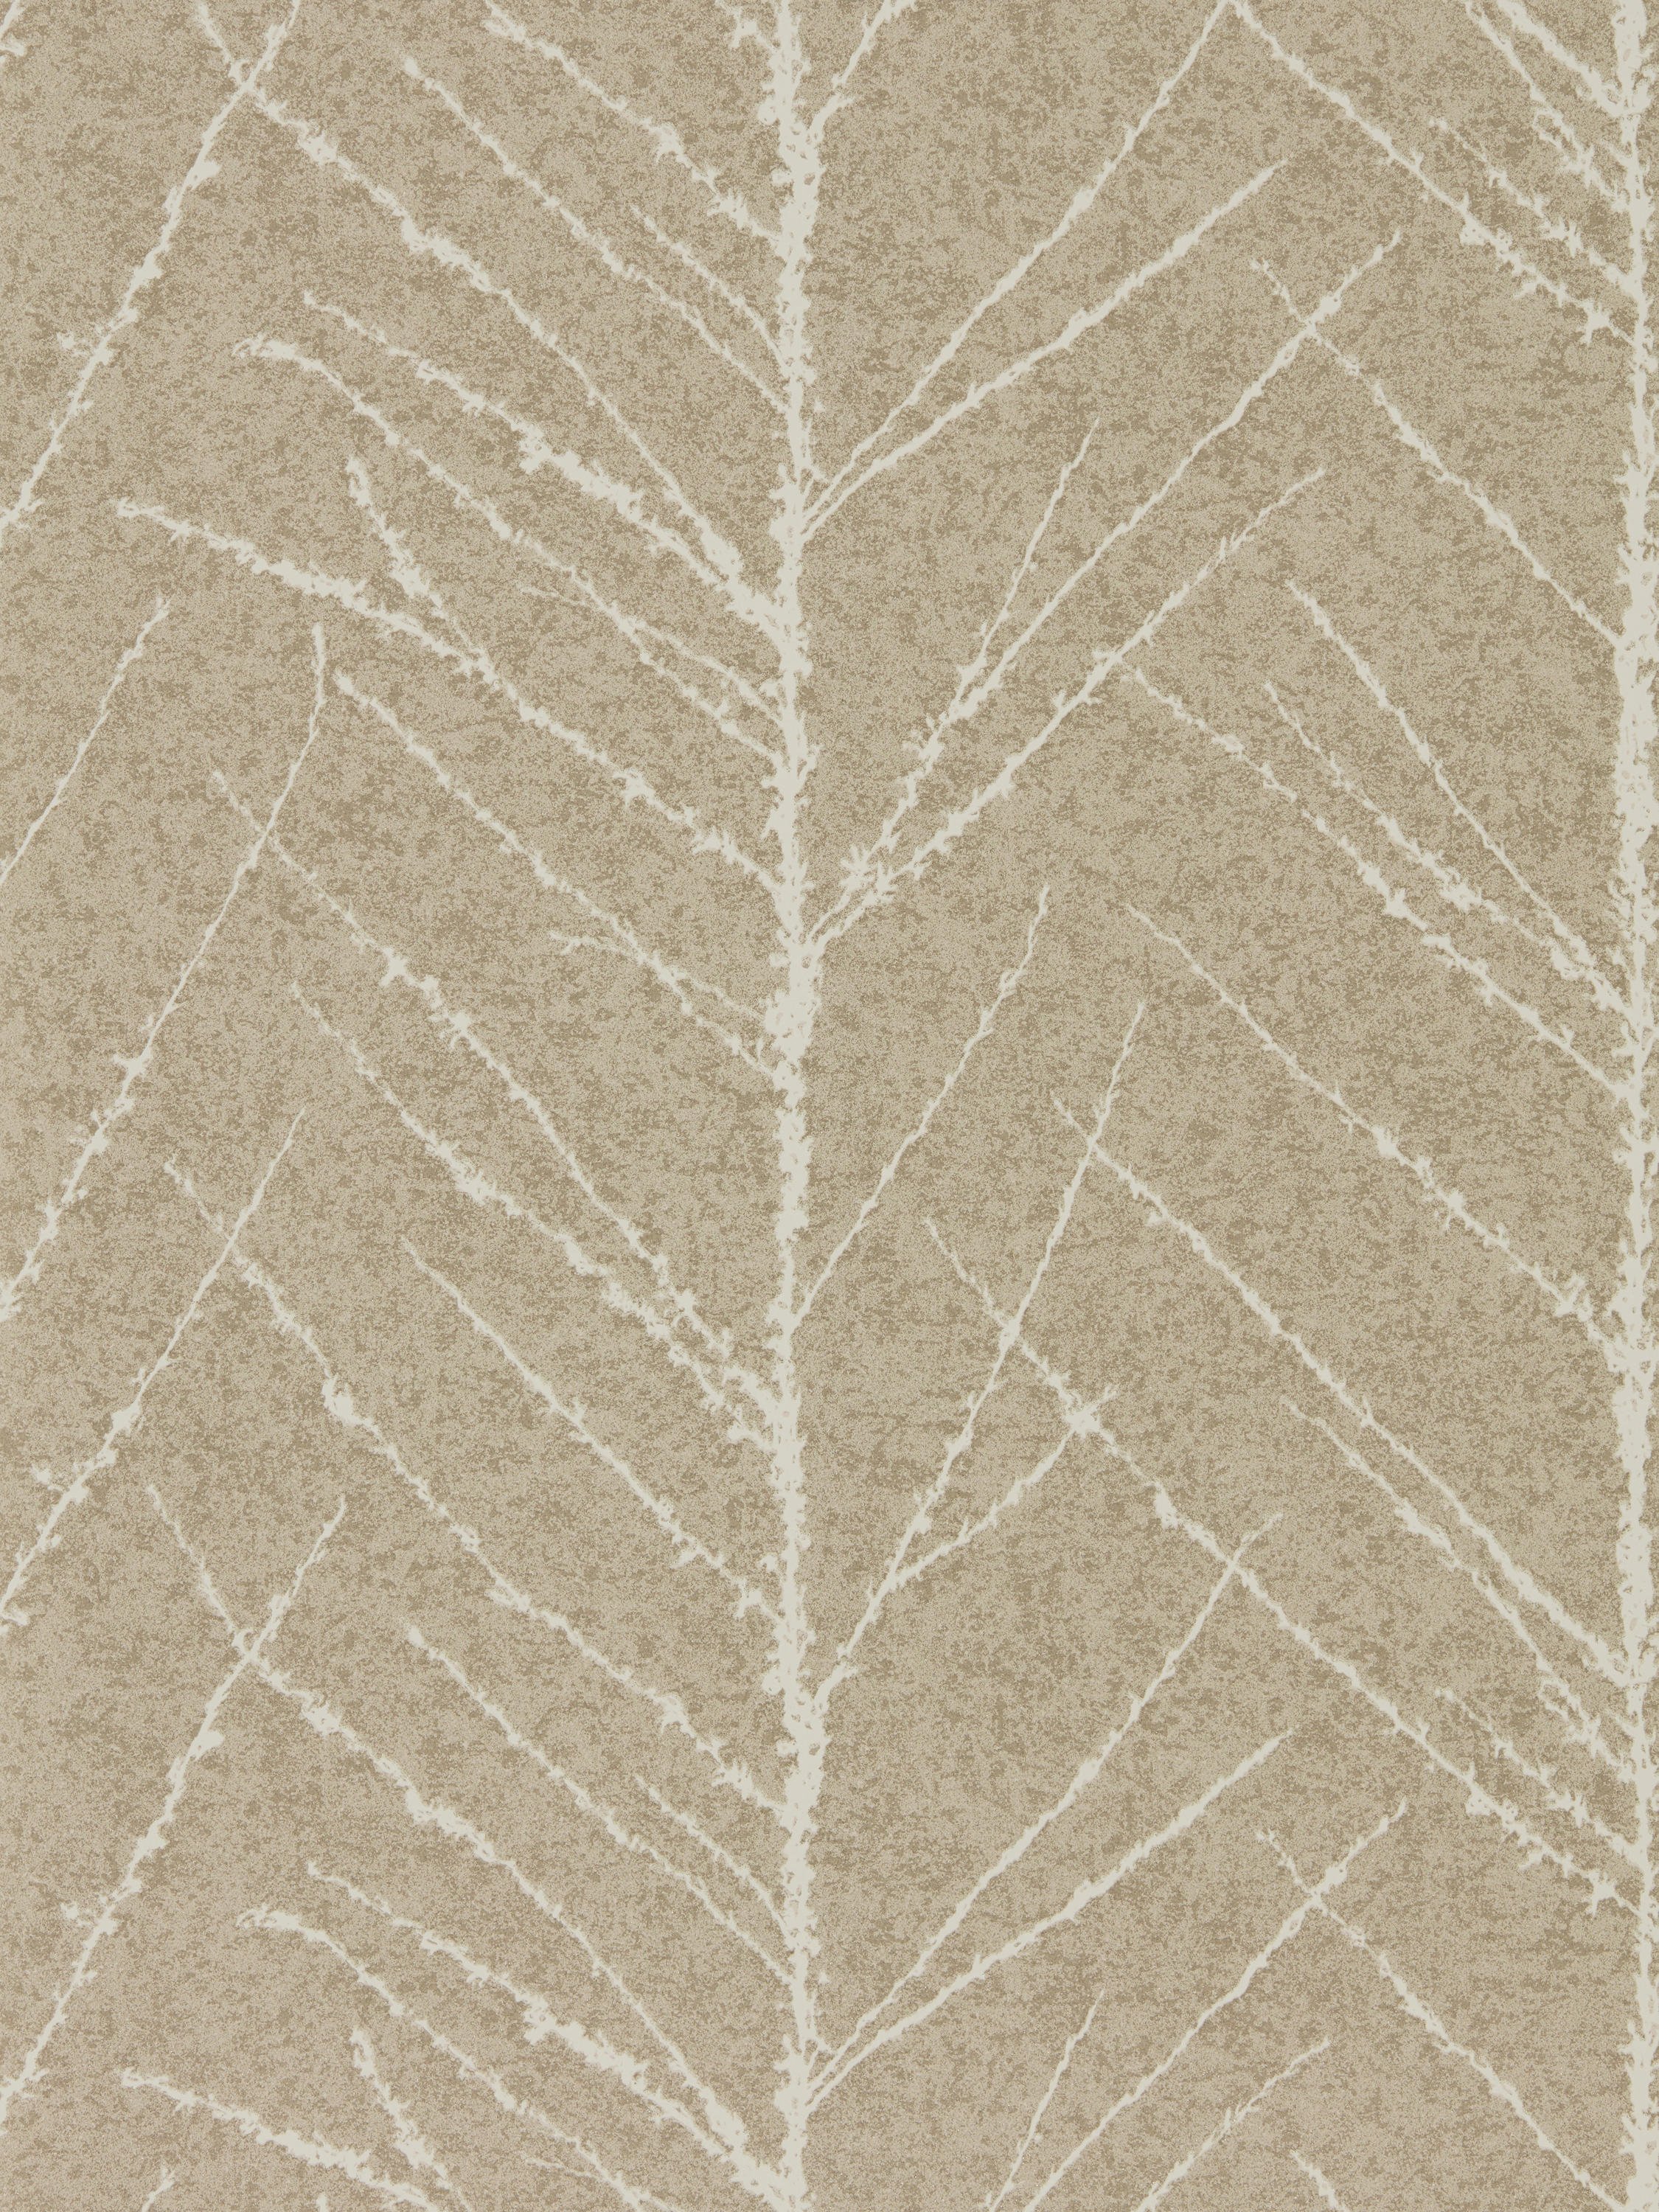 TALI GOLD JUTE Coverings Wallpaper From Anthology